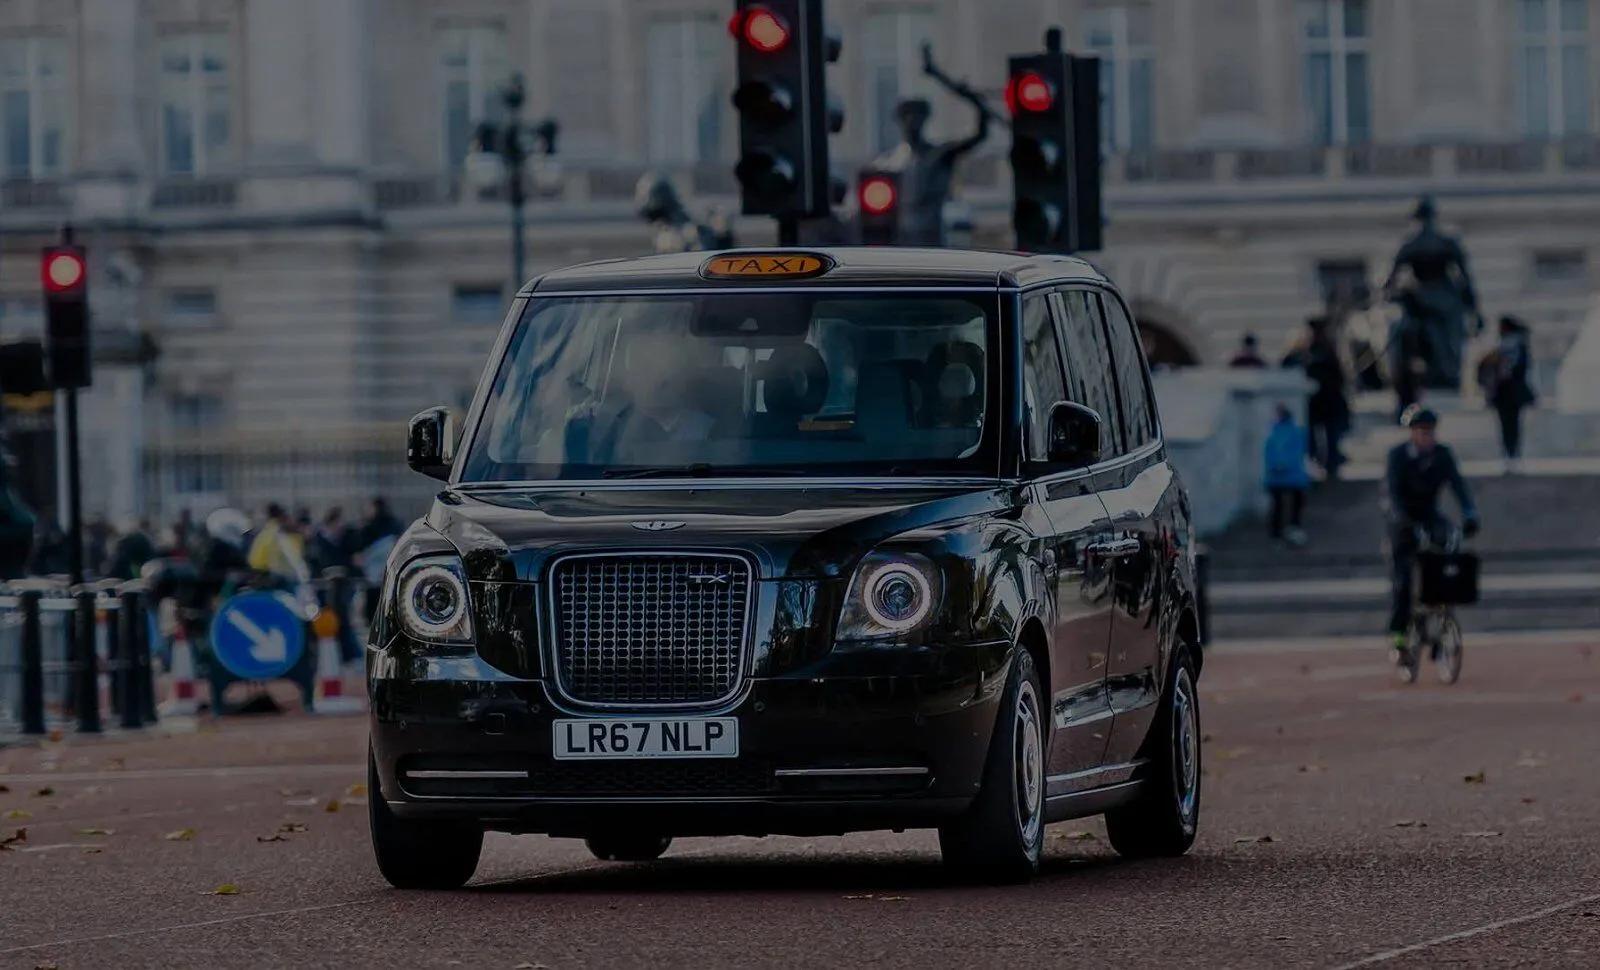 book taxi online london - Does London have a taxi app